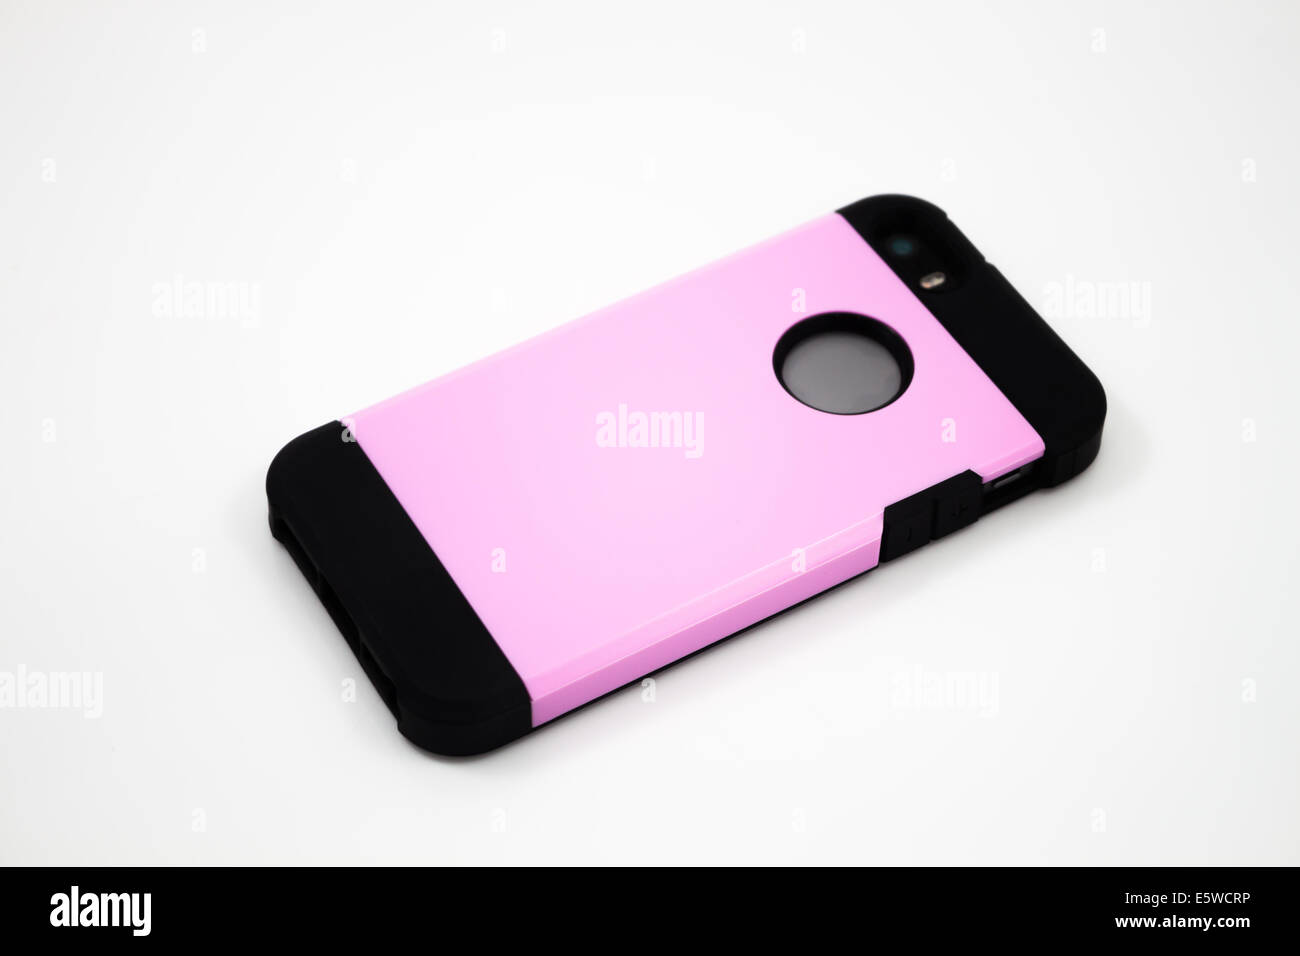 Smartphone with pink case isolated on white background, stock photo Stock Photo